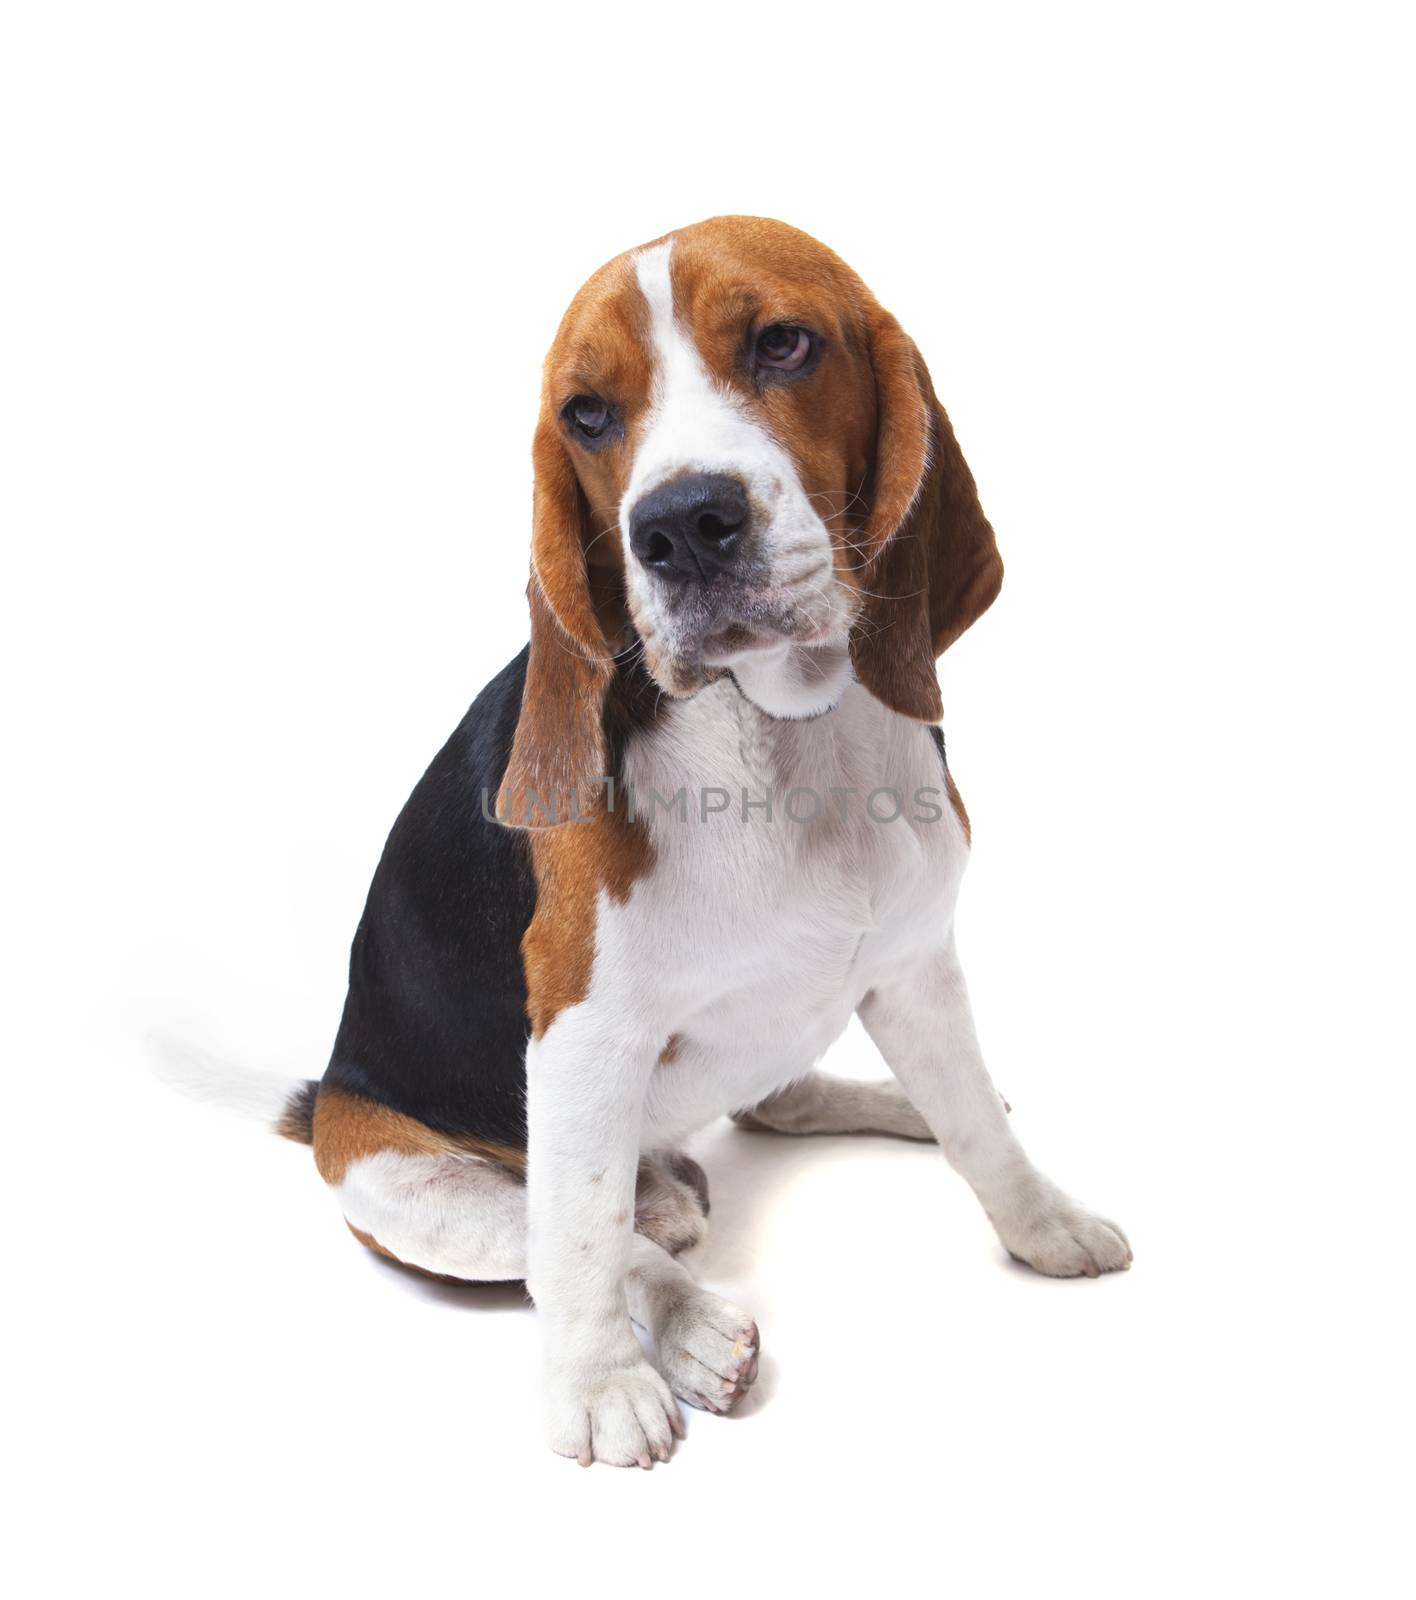 face of beagle dog on white background use for pets theme